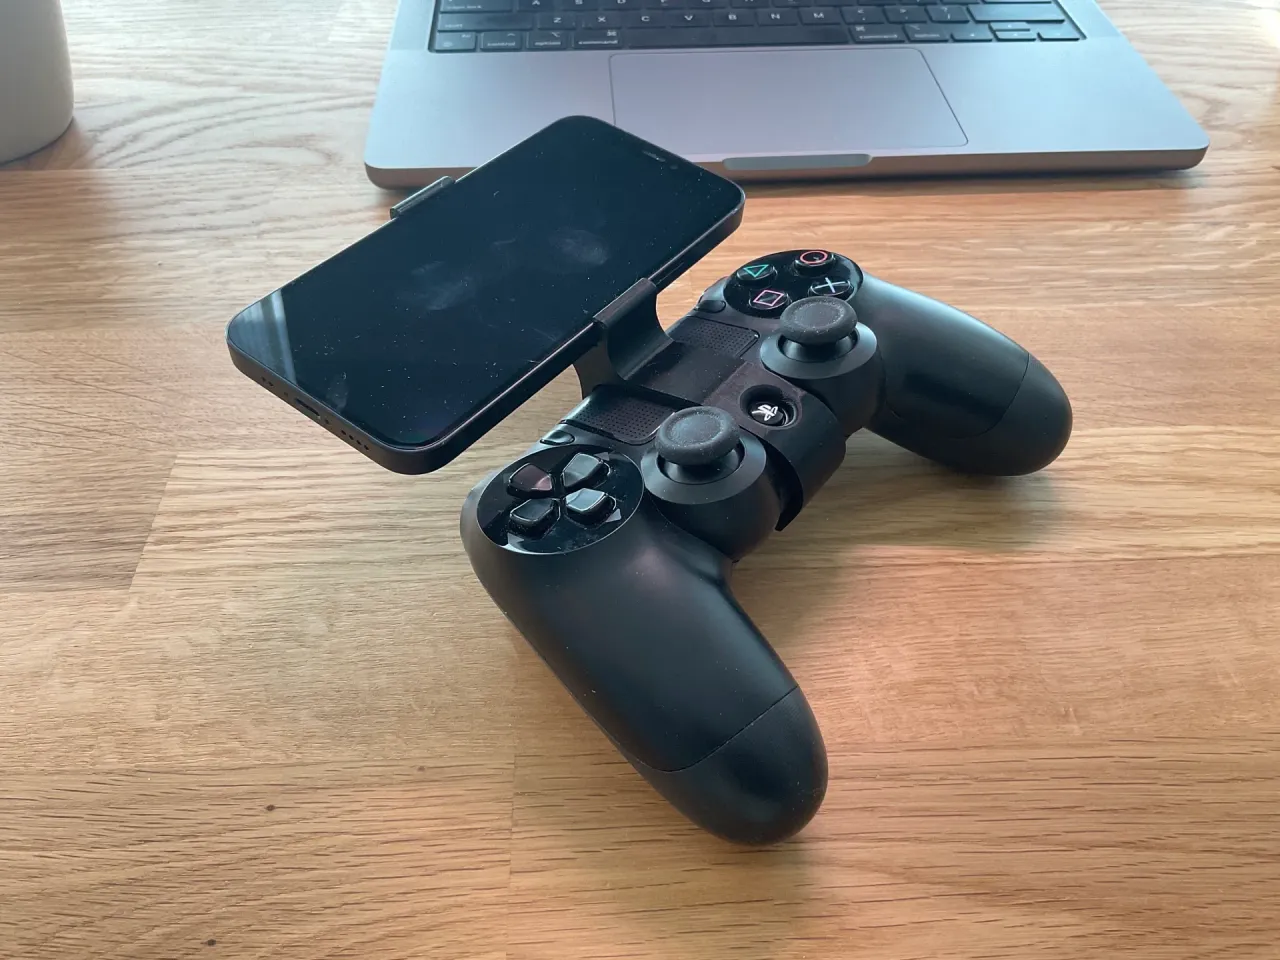 controller iPhone 12 mini mount v2 by Oliver Xie Download free STL | Printables.com